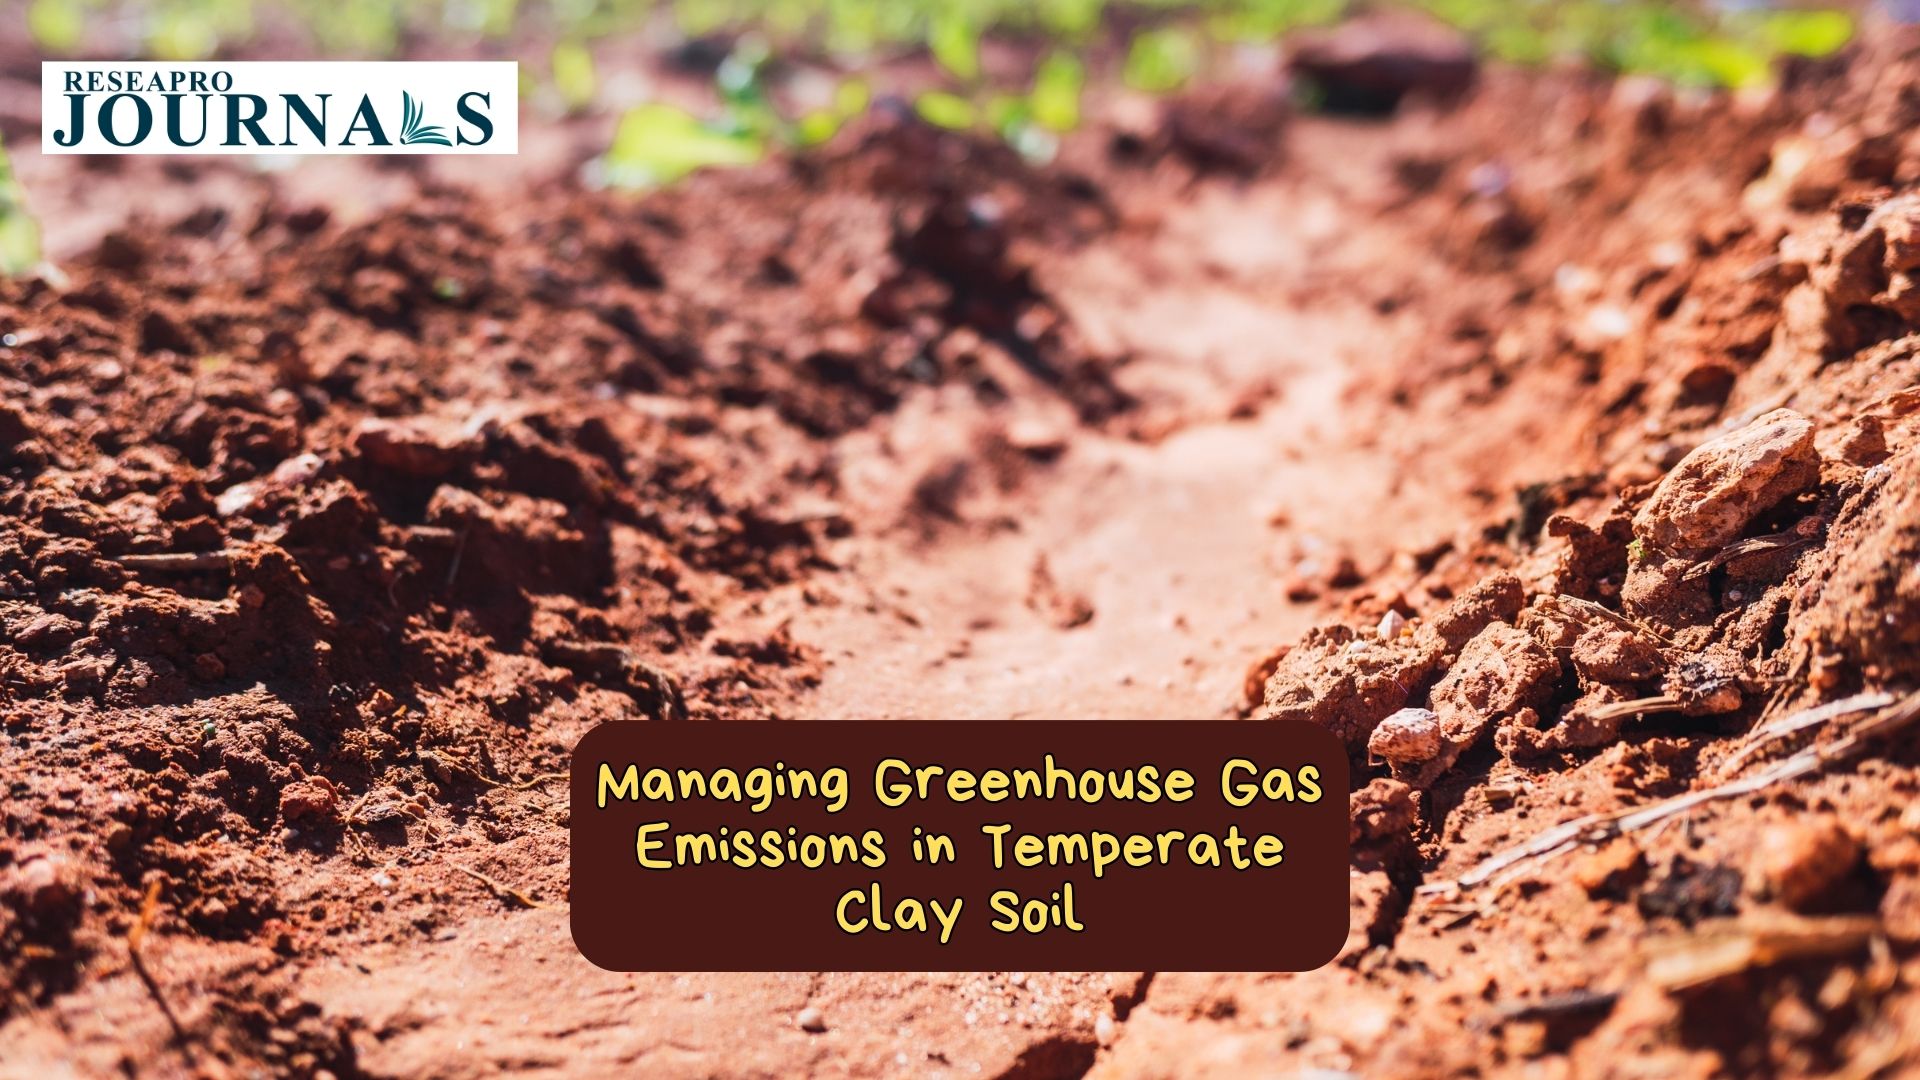 Managing Greenhouse Gas Emissions in Temperate Clay Soil